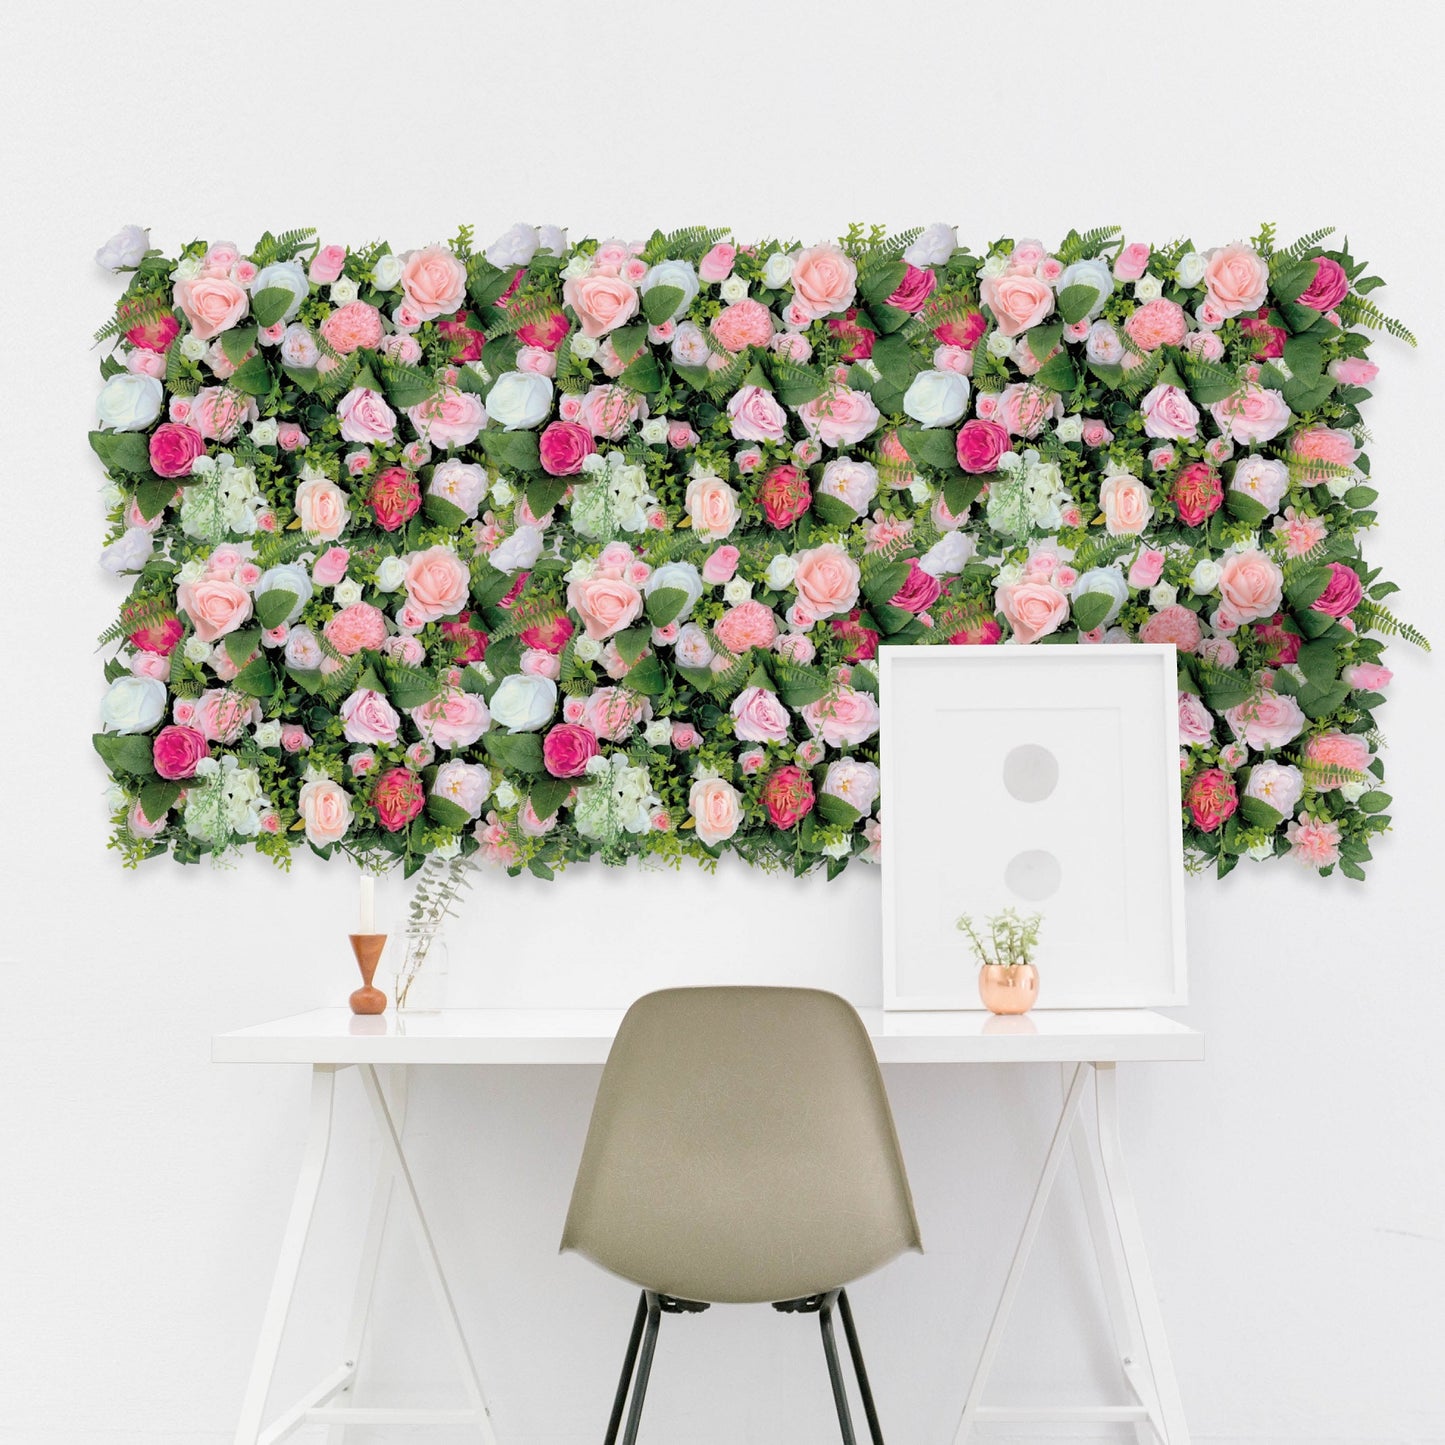 Flower wall "RASPBERRY GARDEN" made of Realtouch artificial plants